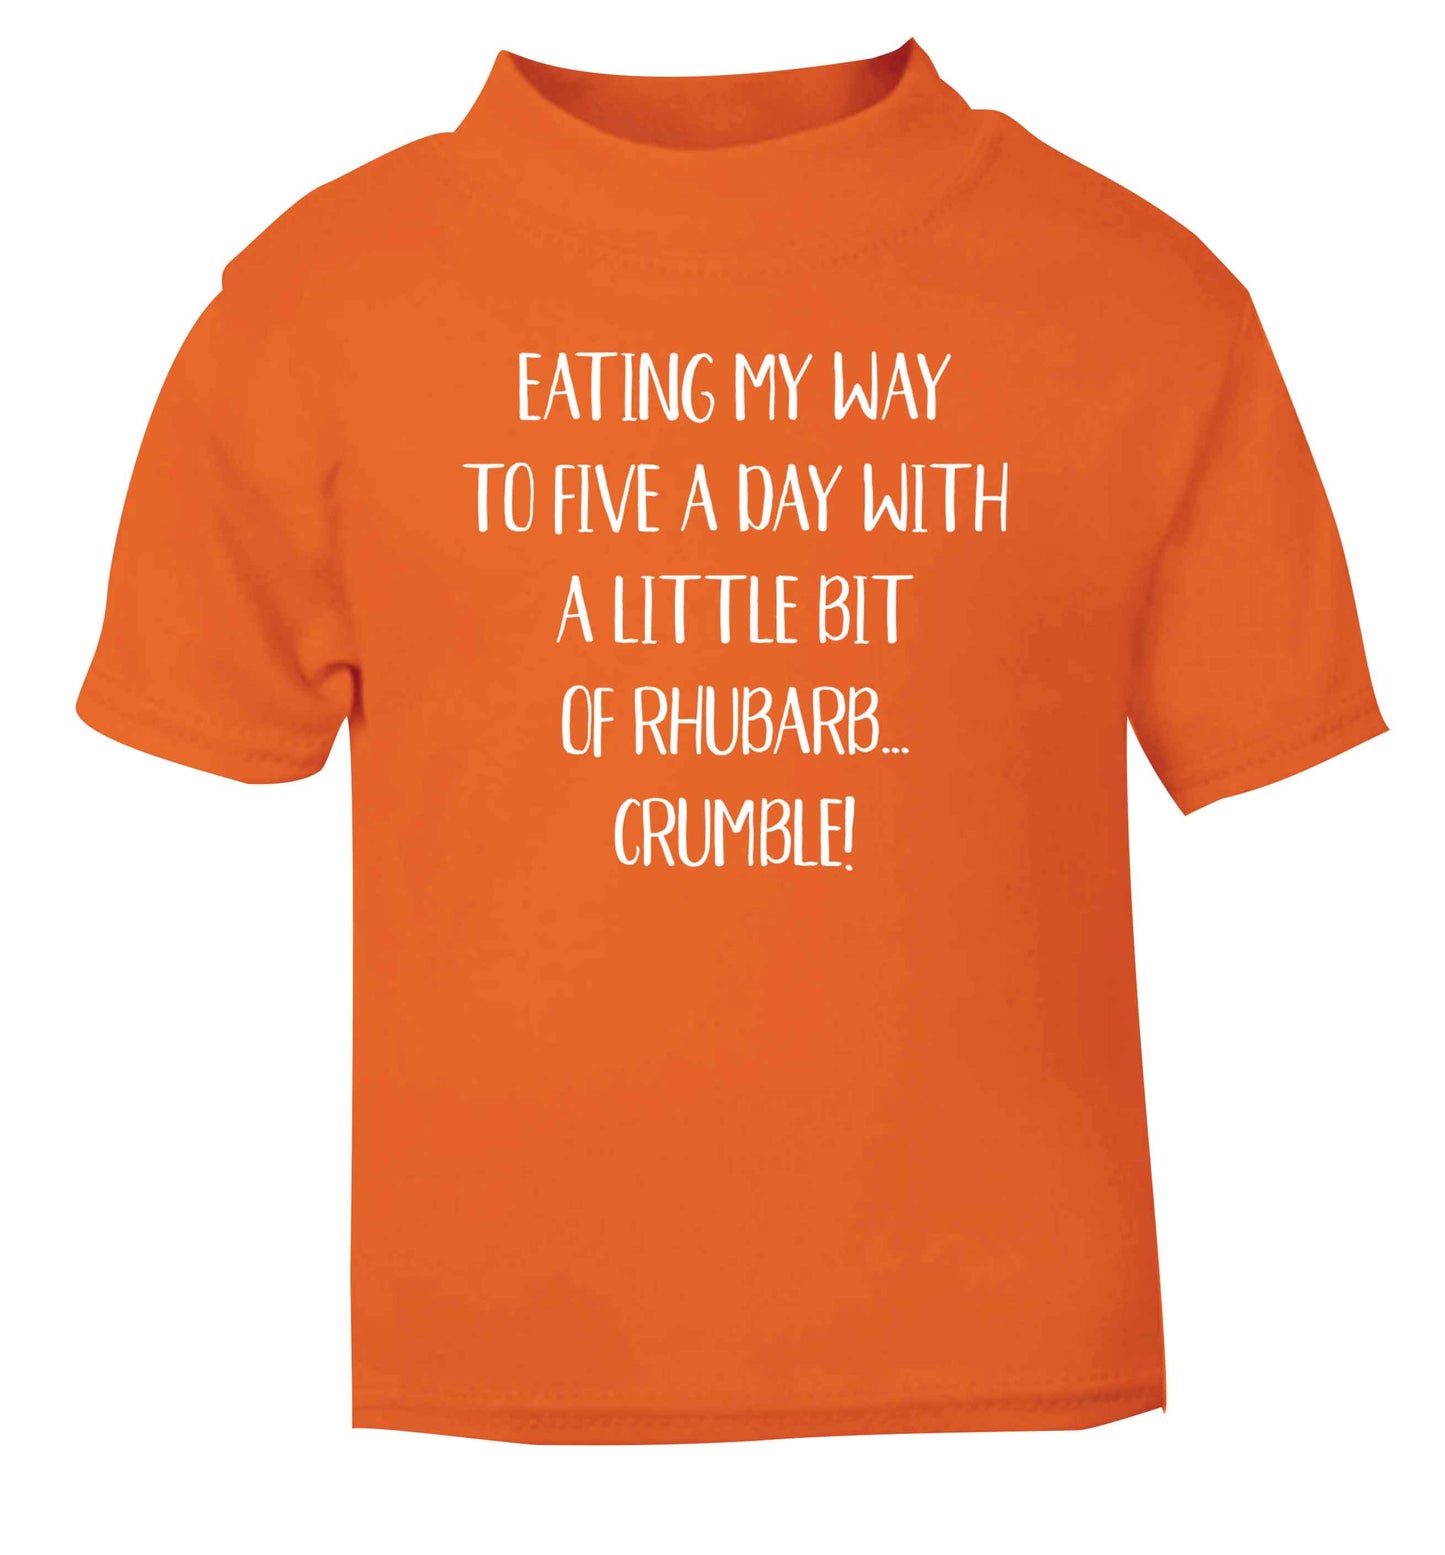 Eating my way to five a day with a little bit of rhubarb crumble orange Baby Toddler Tshirt 2 Years